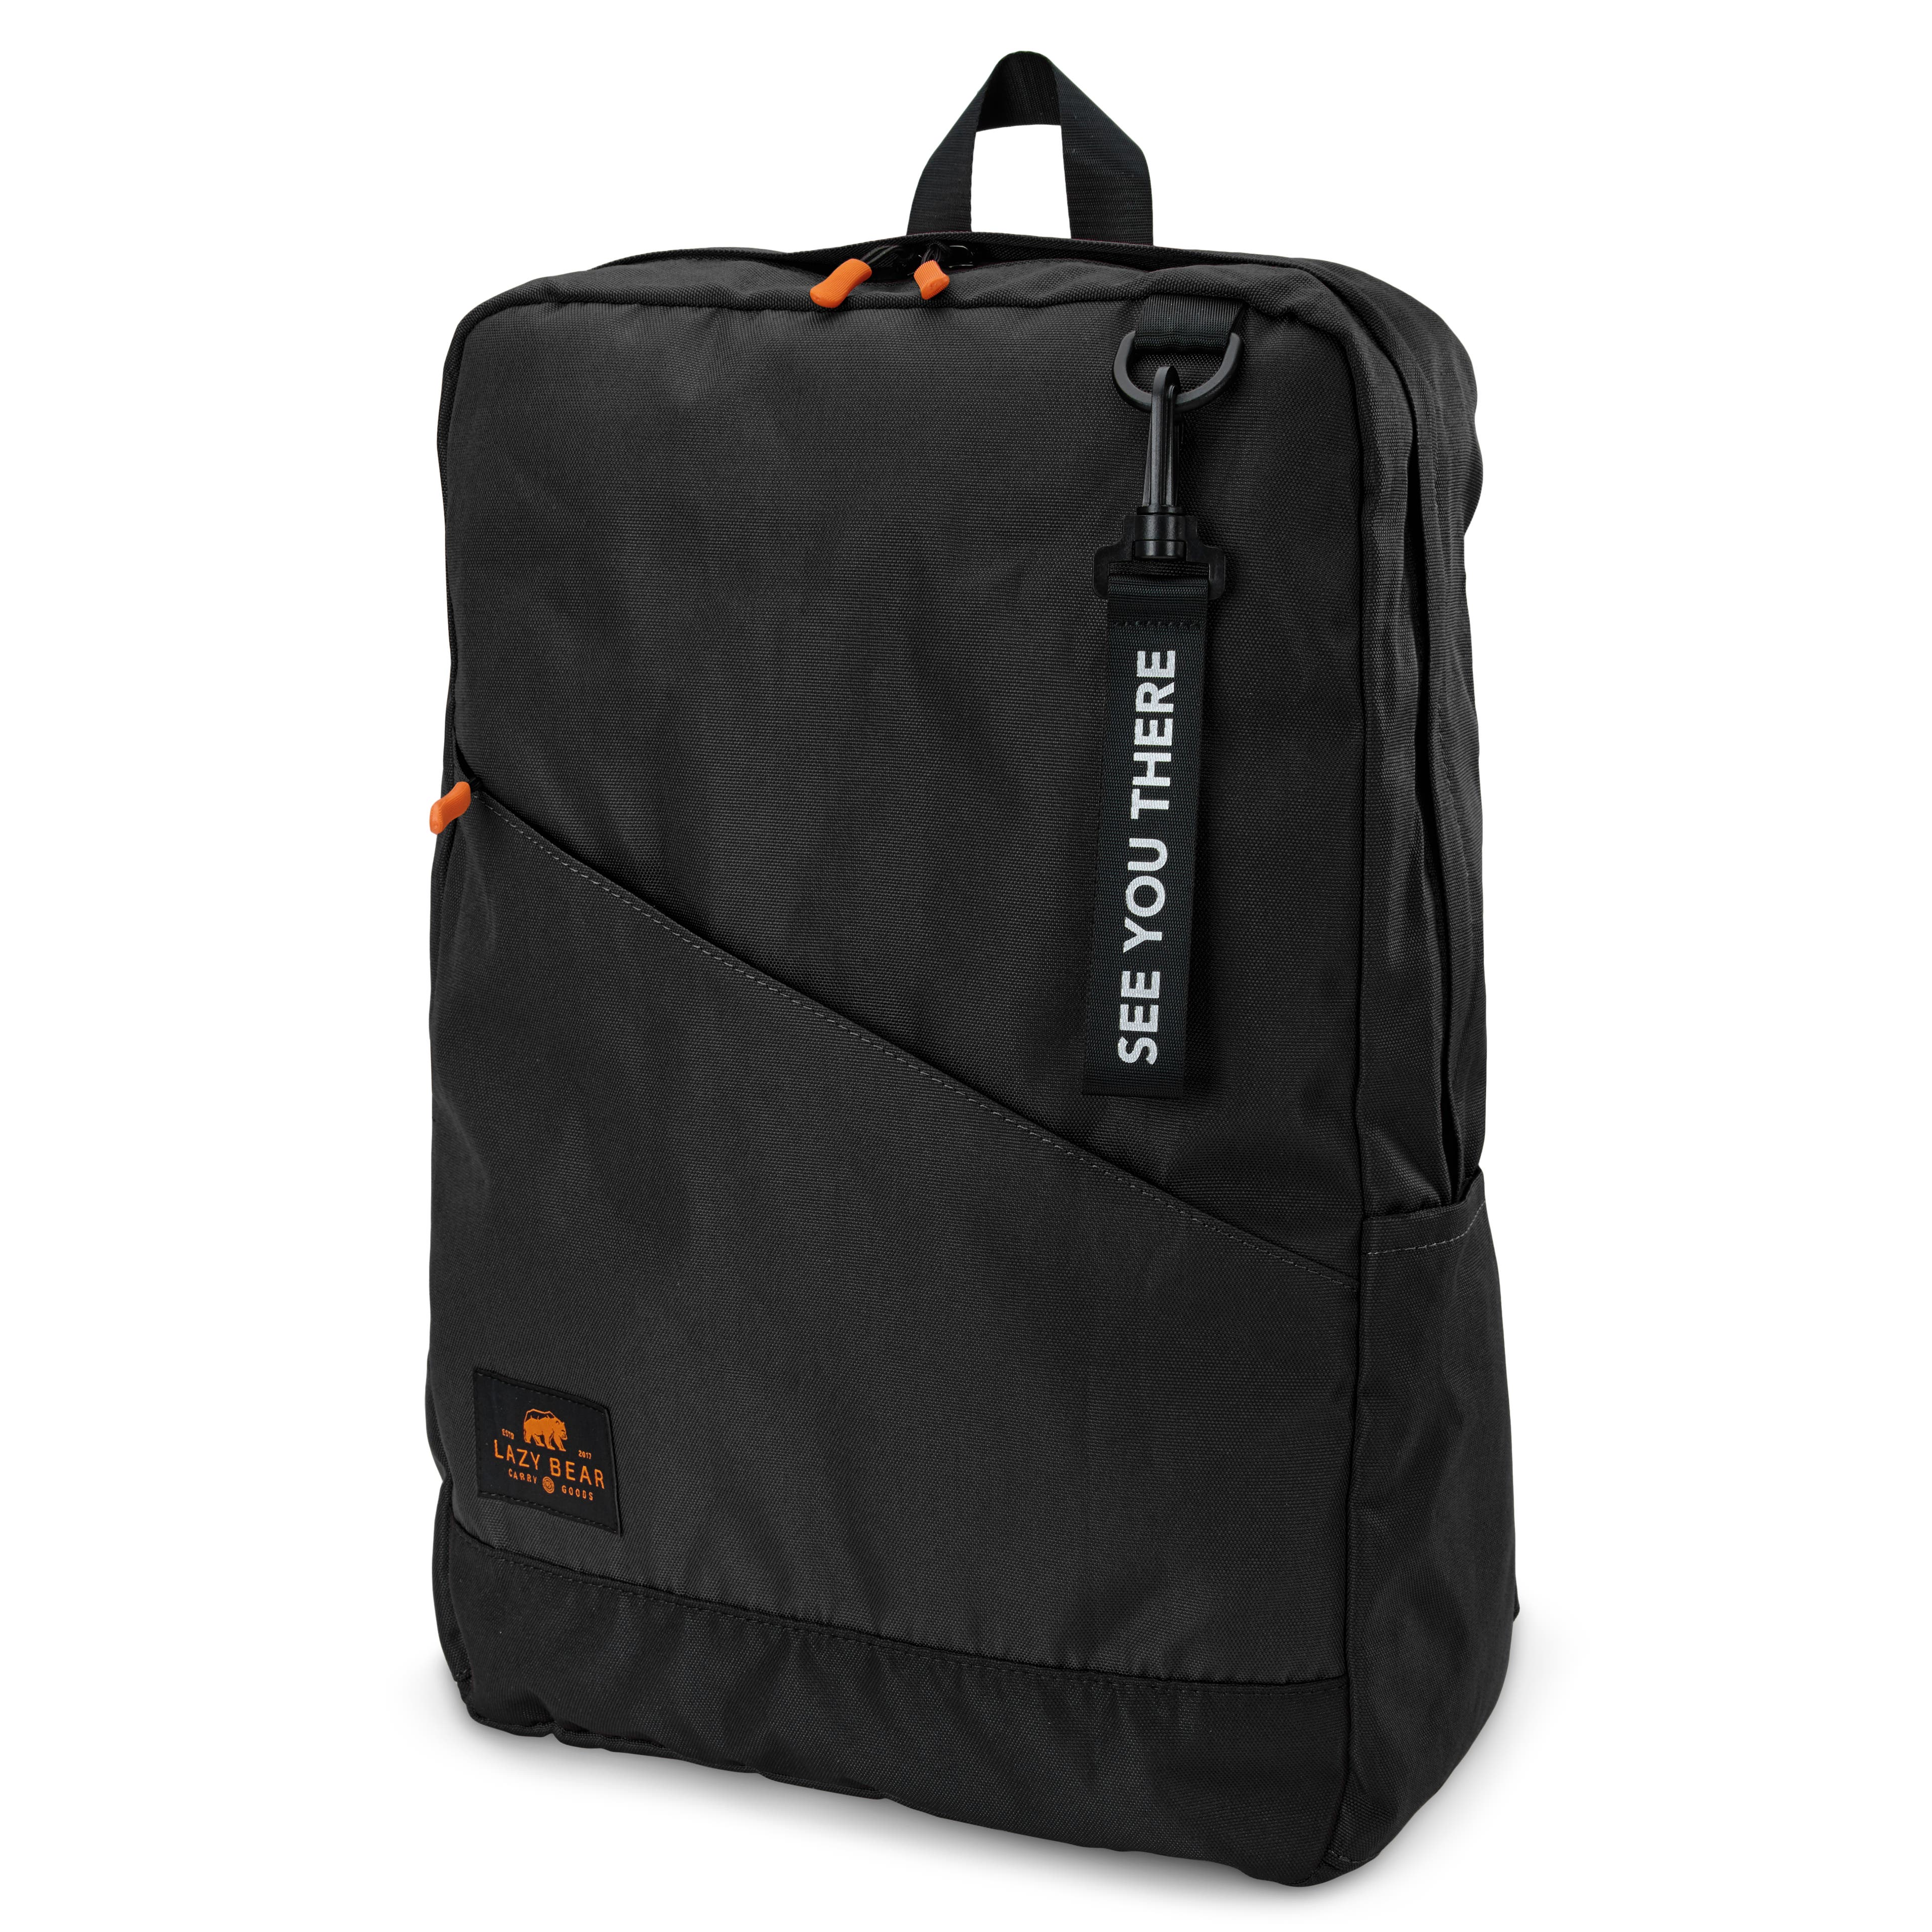 Home 365 Foldable Travel Bag with Removable Compartments 